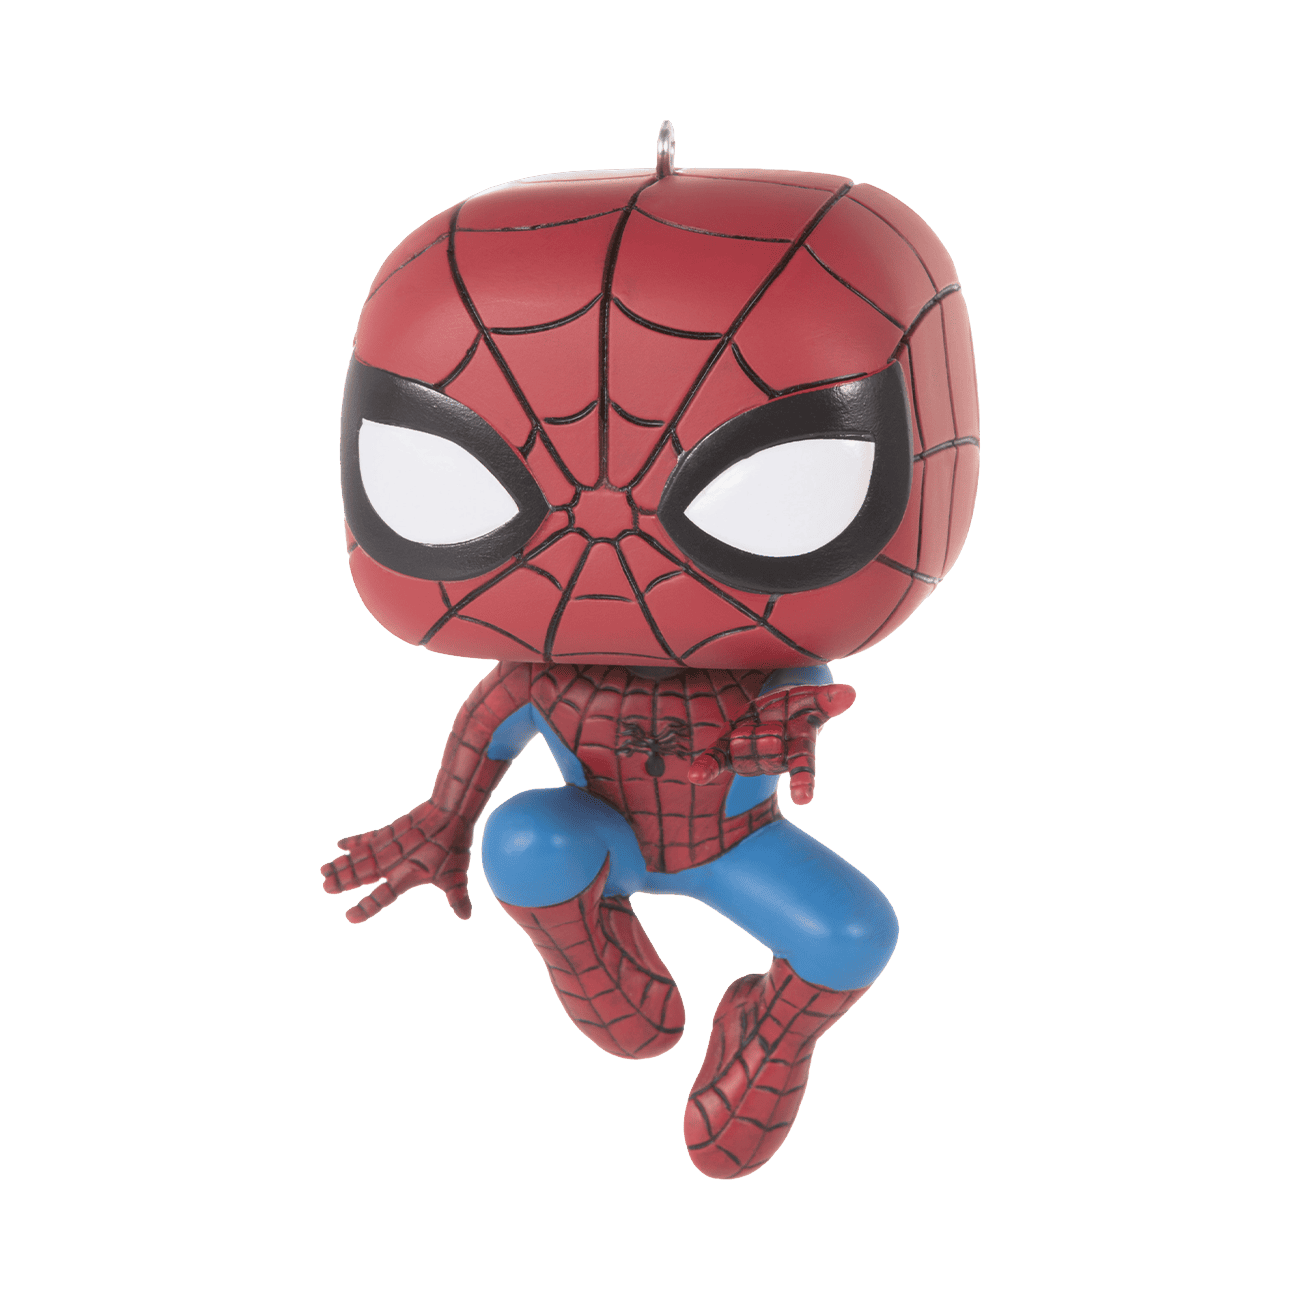 Buy Spider-Man Holiday Ornament at Funko.